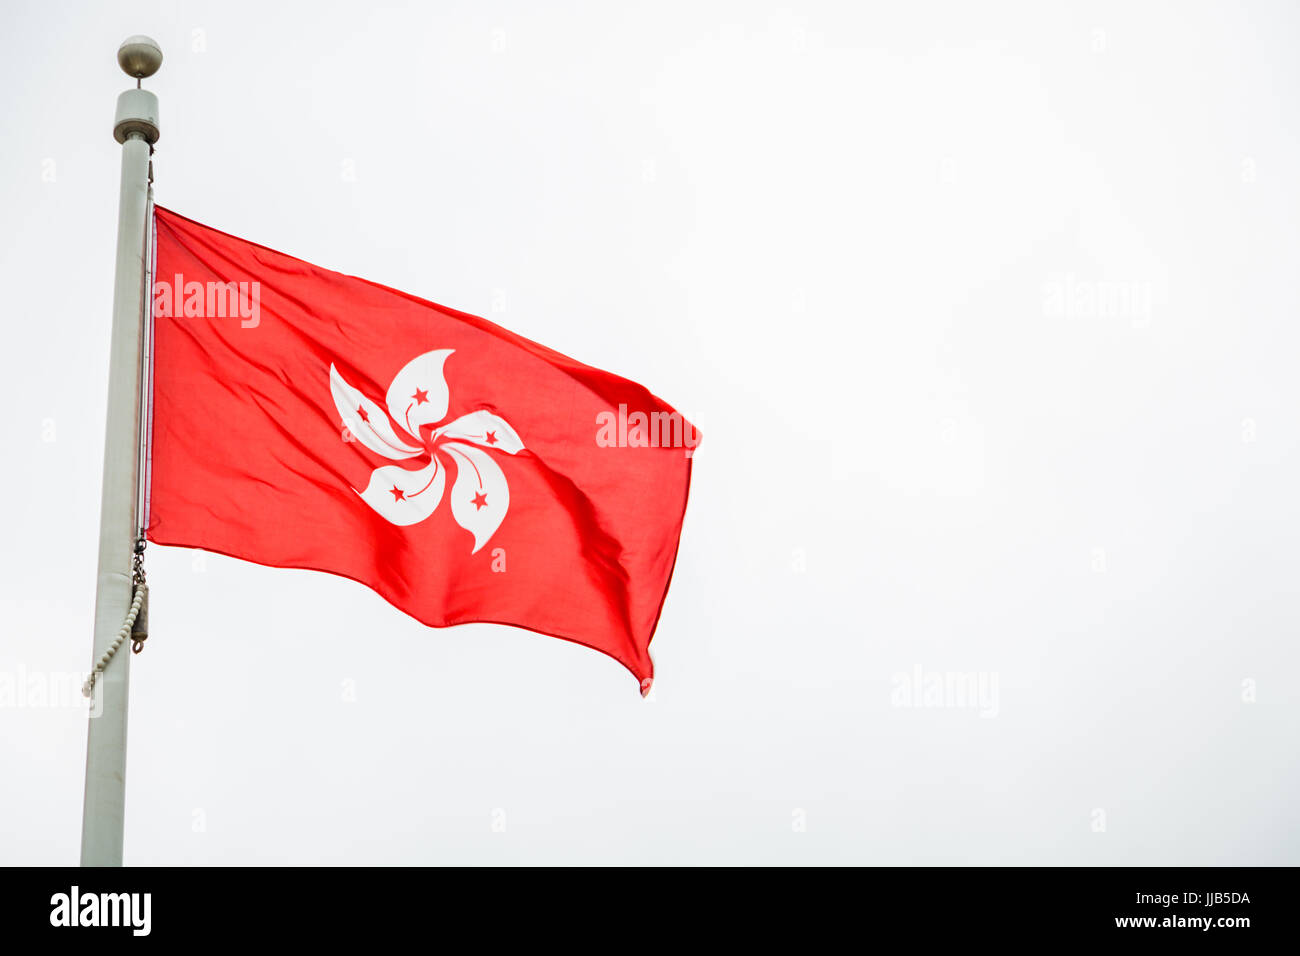 Hong Kong S.A.R Flag waving in the wind. Stock Photo